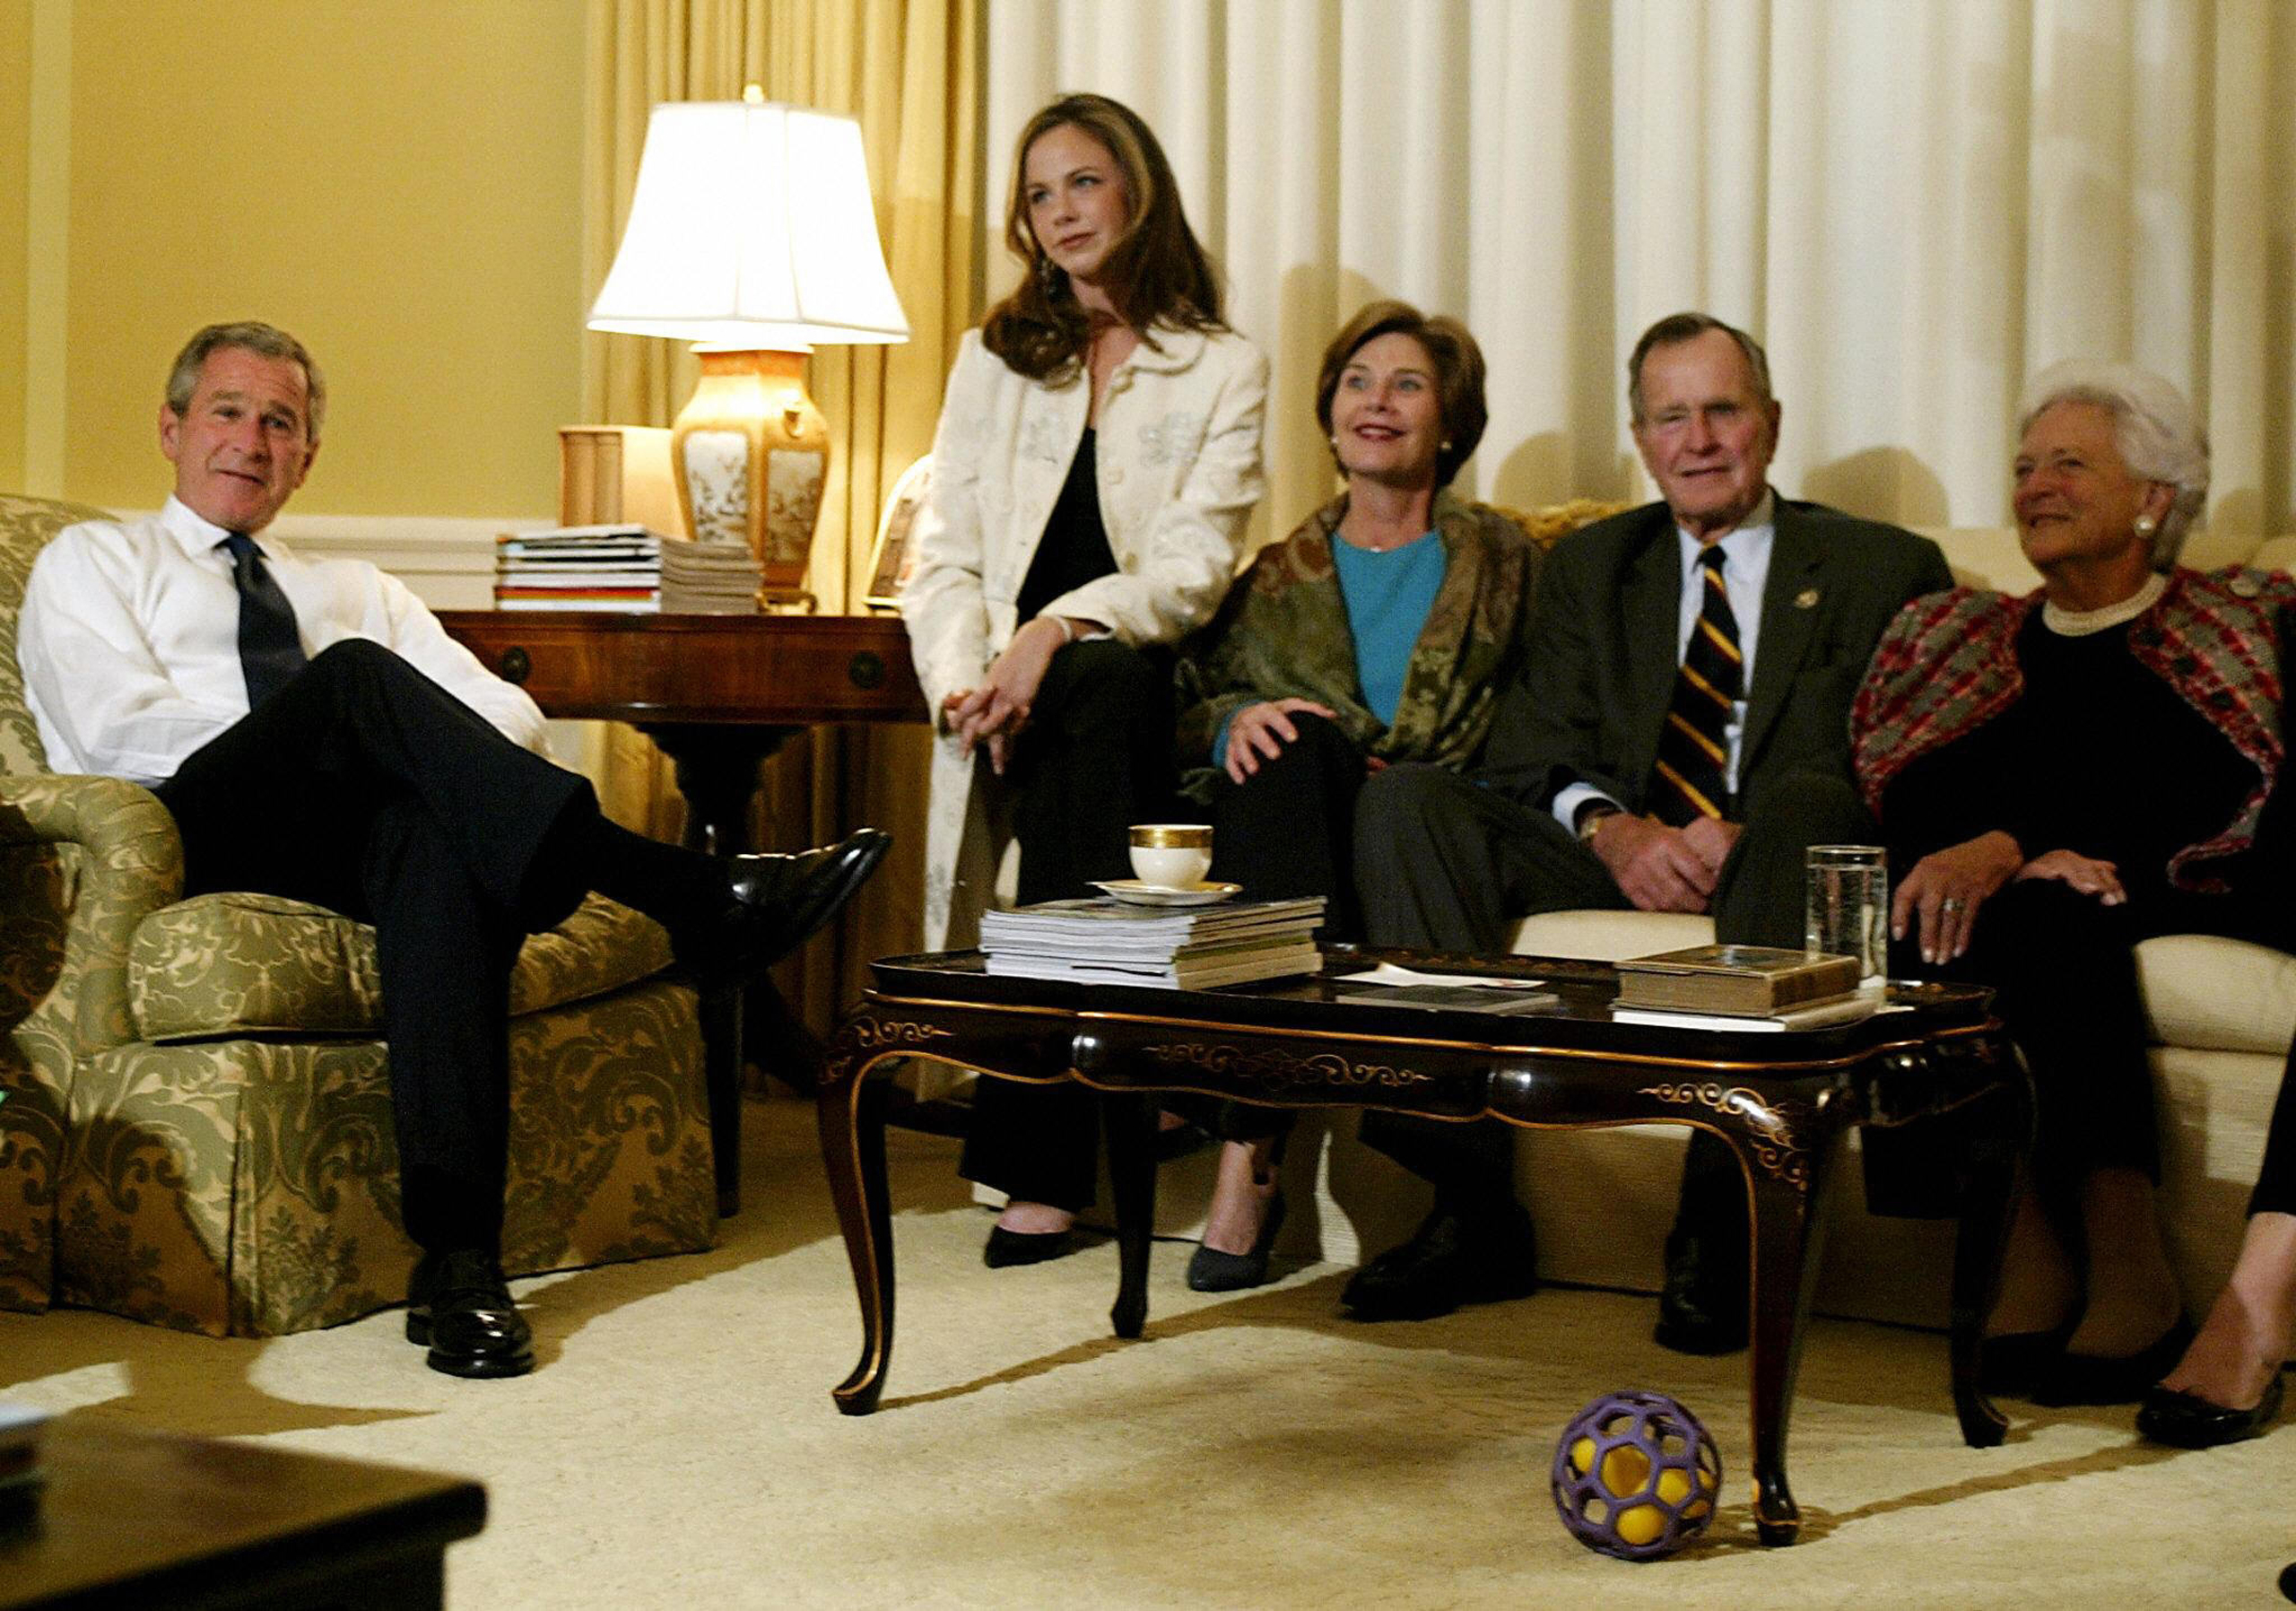 President-elect George W. Bush (L) and First Lady Laura Bush (C) are joined by daughter Barbara (2L), former U.S. president George H.W. Bush (2R) and his wife former first lady Barbara (R) watching the election retursn in the White House in November of 2004.